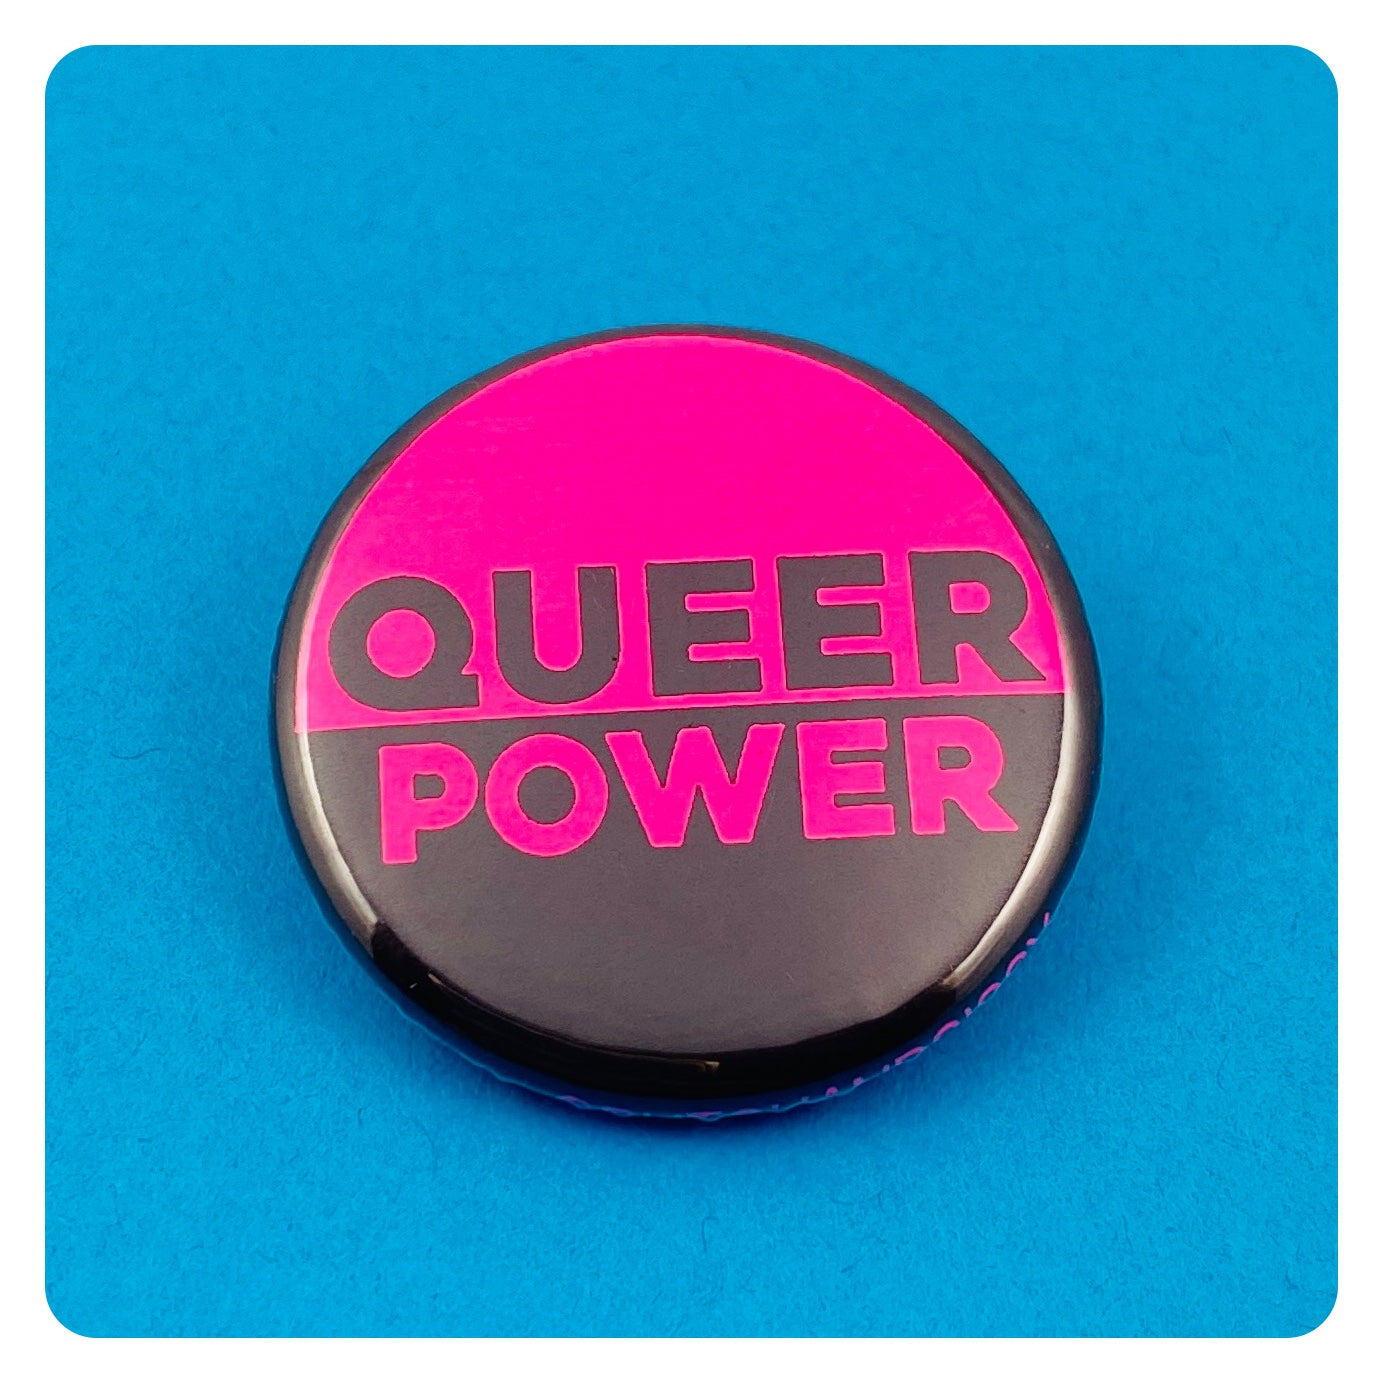 Queer Power Pinback Button